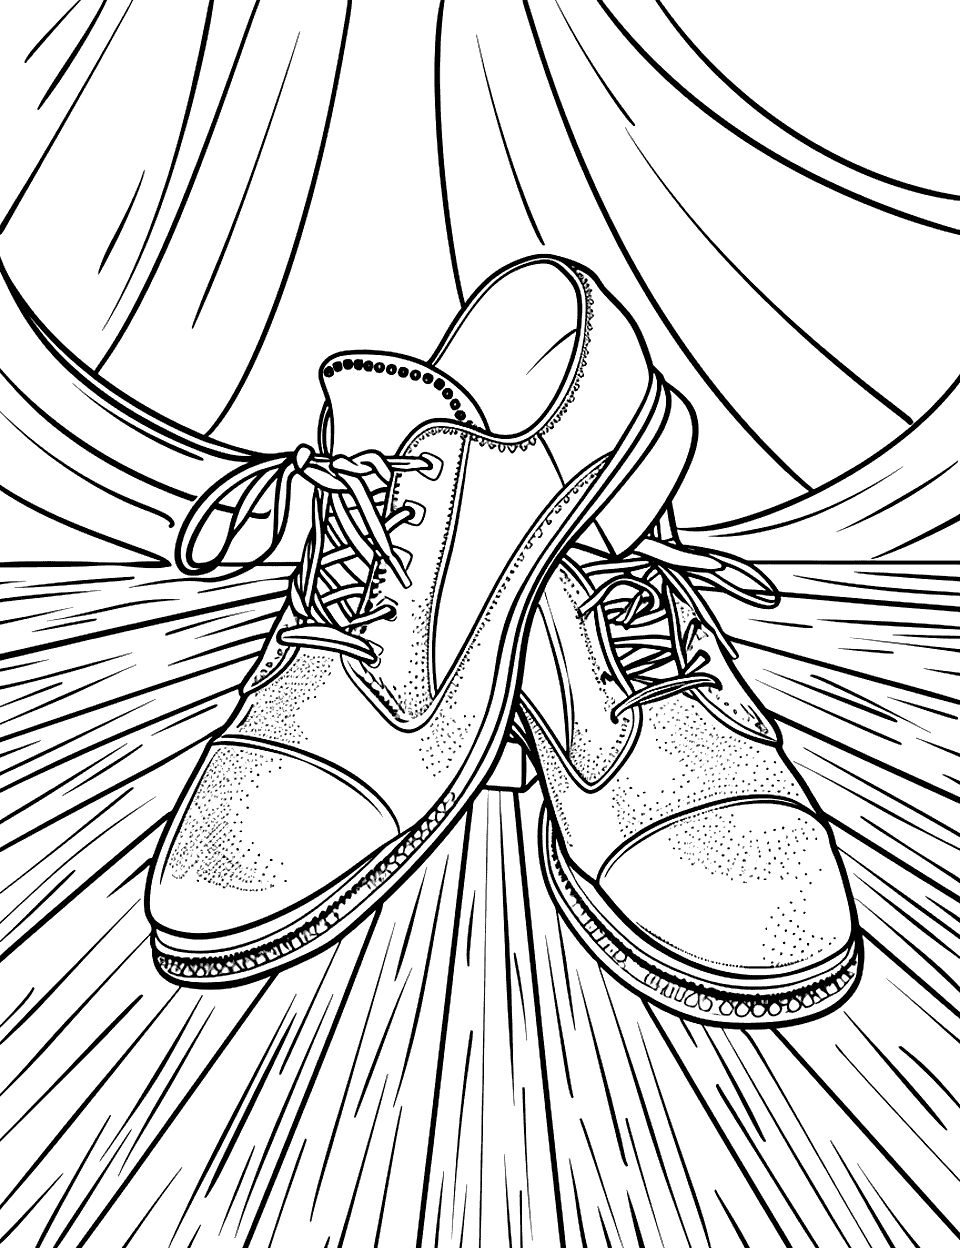 Tap Dancing Shoes on Stage Shoe Coloring Page - Shiny tap shoes on a wooden stage.